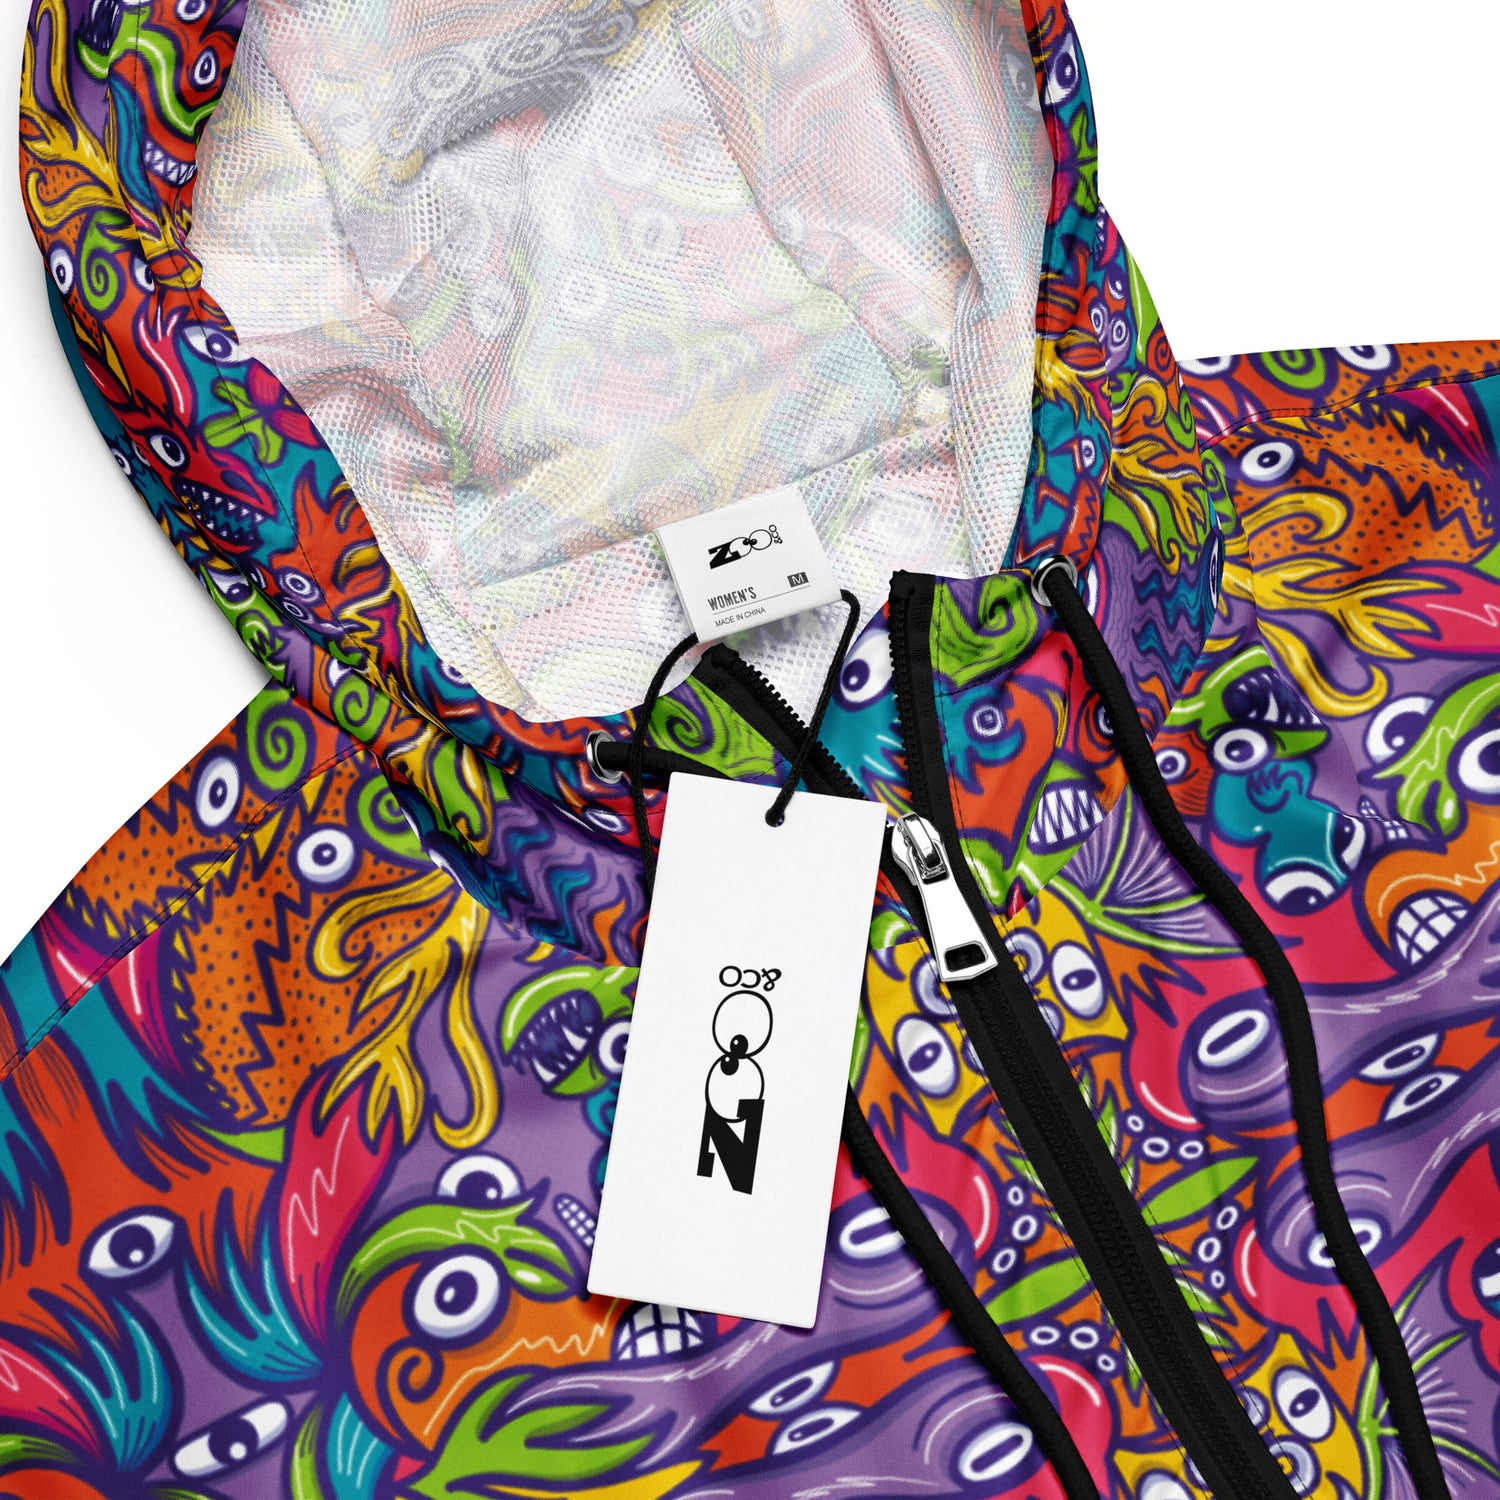 The Wizard's Dream: Shaping a New Generation of Doodle Creatures - Women’s cropped windbreaker. Product details